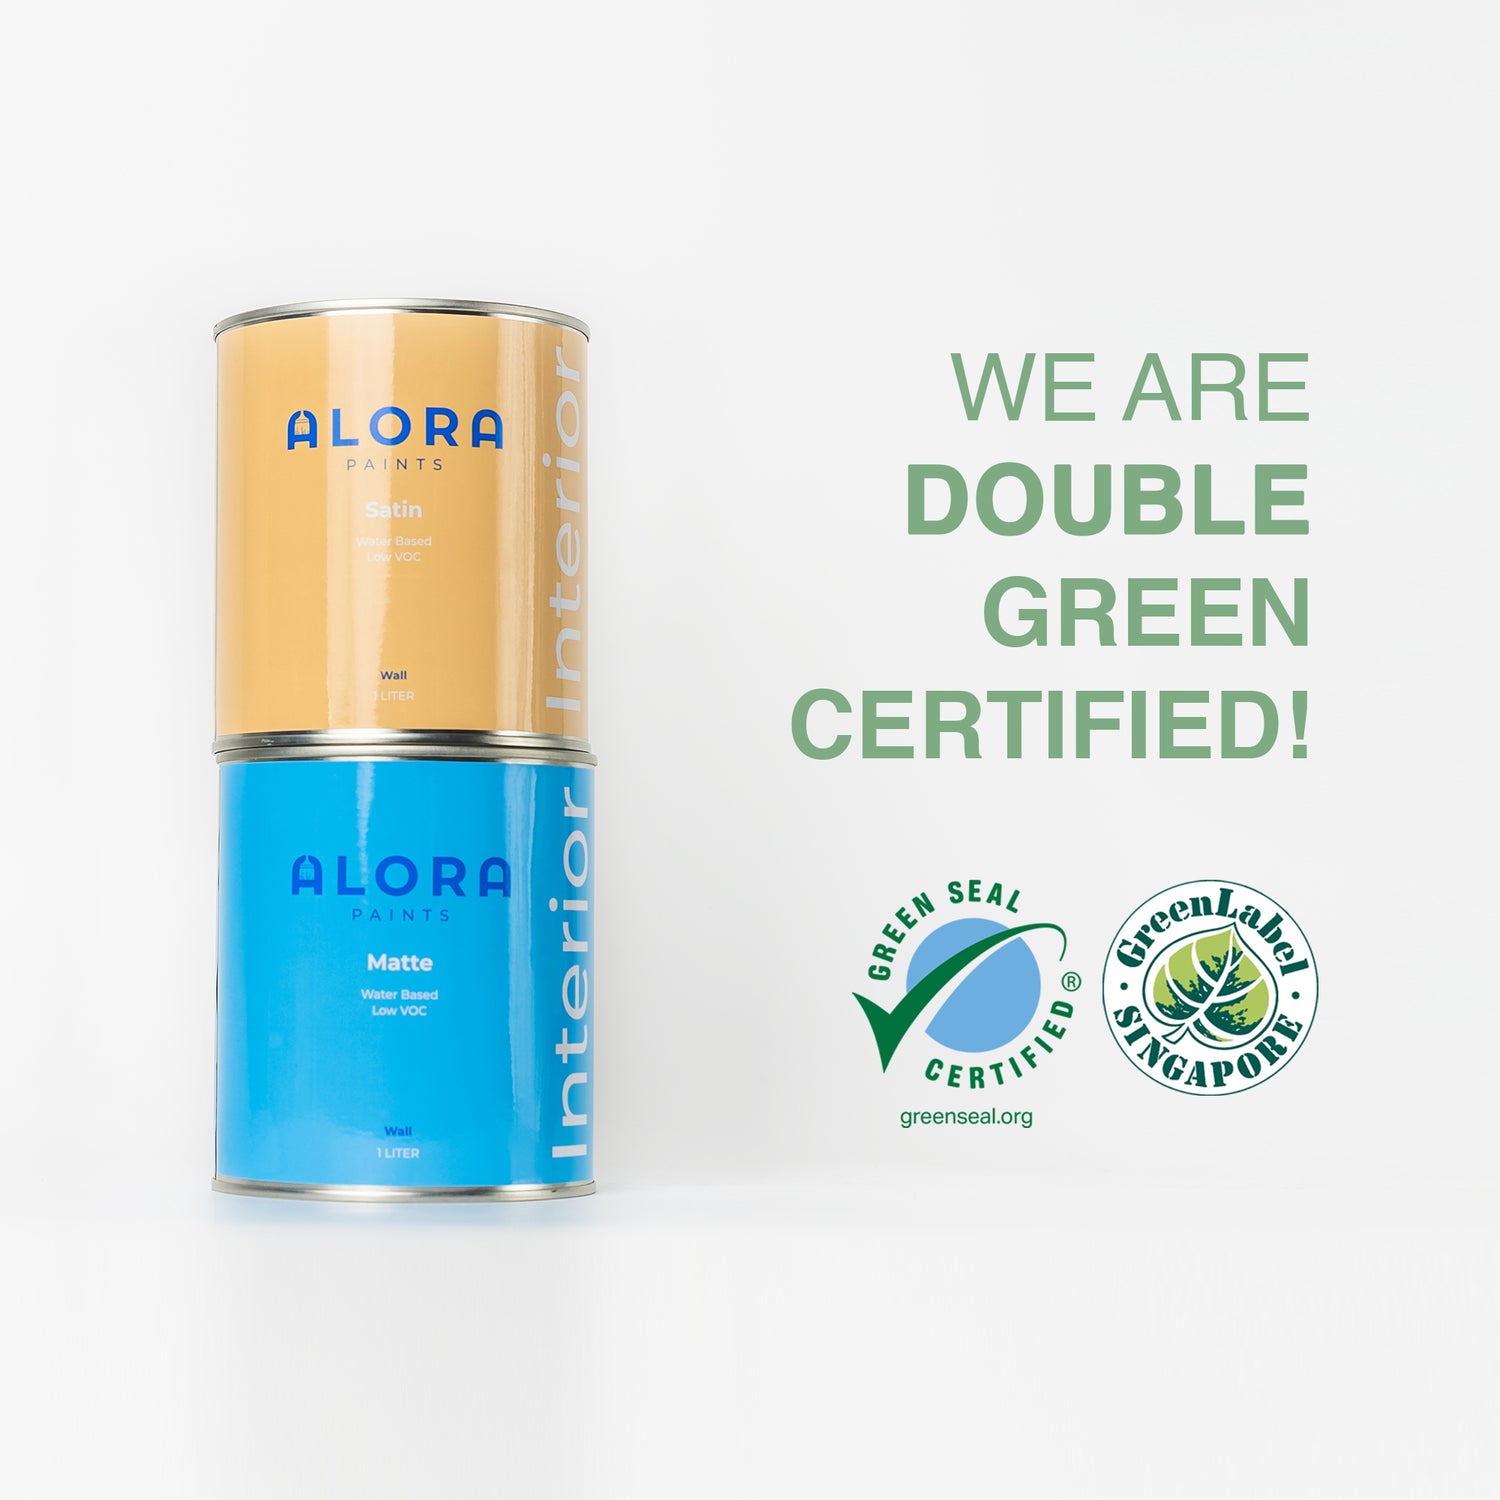 Alora is the First Singapore-Based Paint Company to Earn U.S. Green Seal Certification